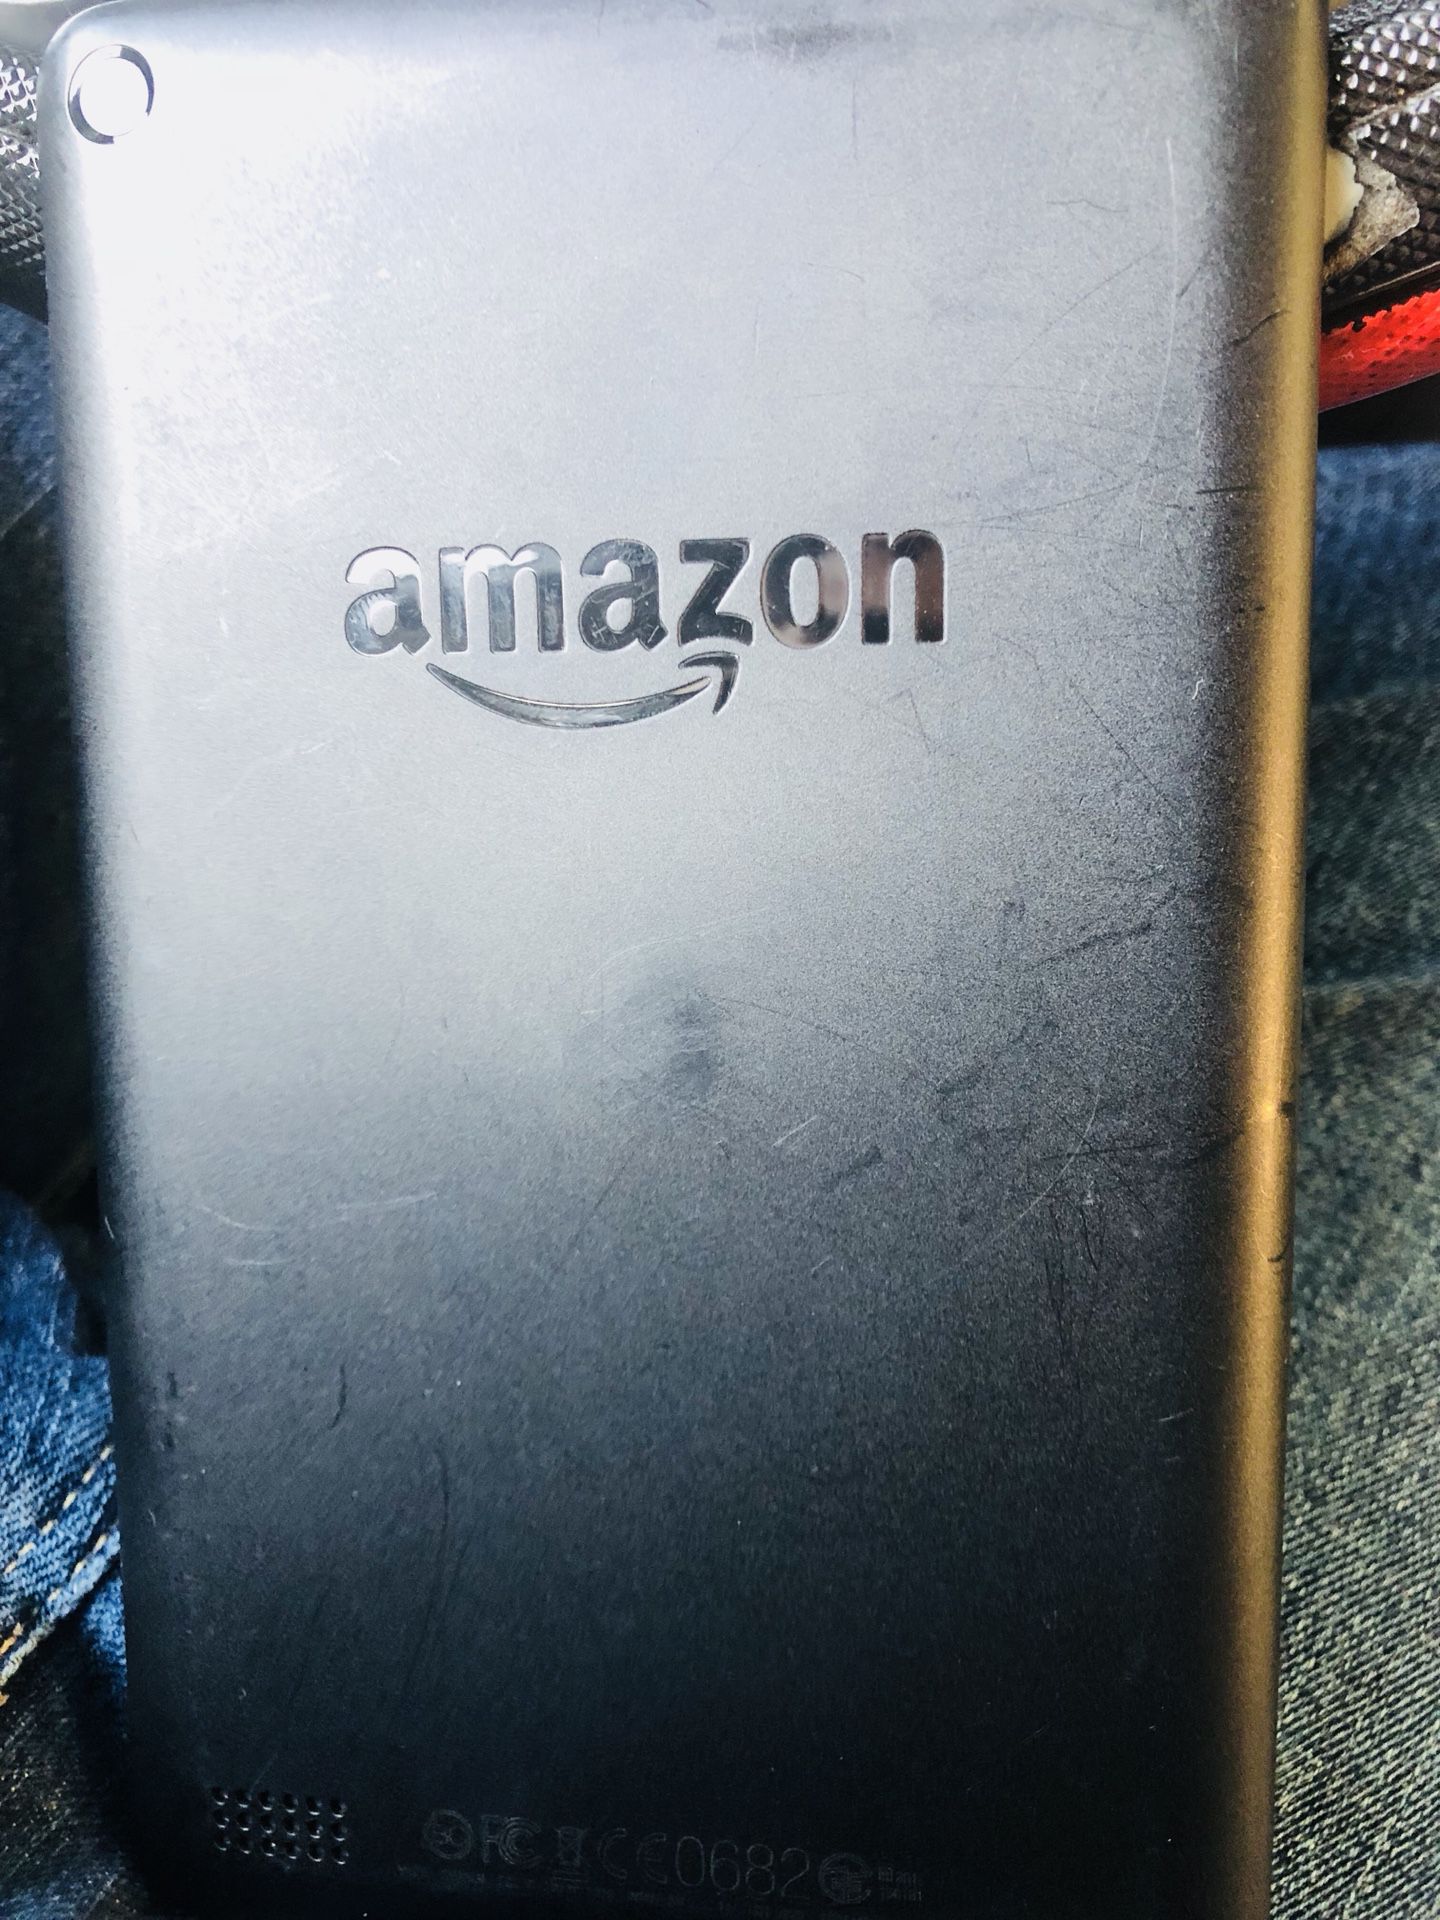 Amazon fire tablets